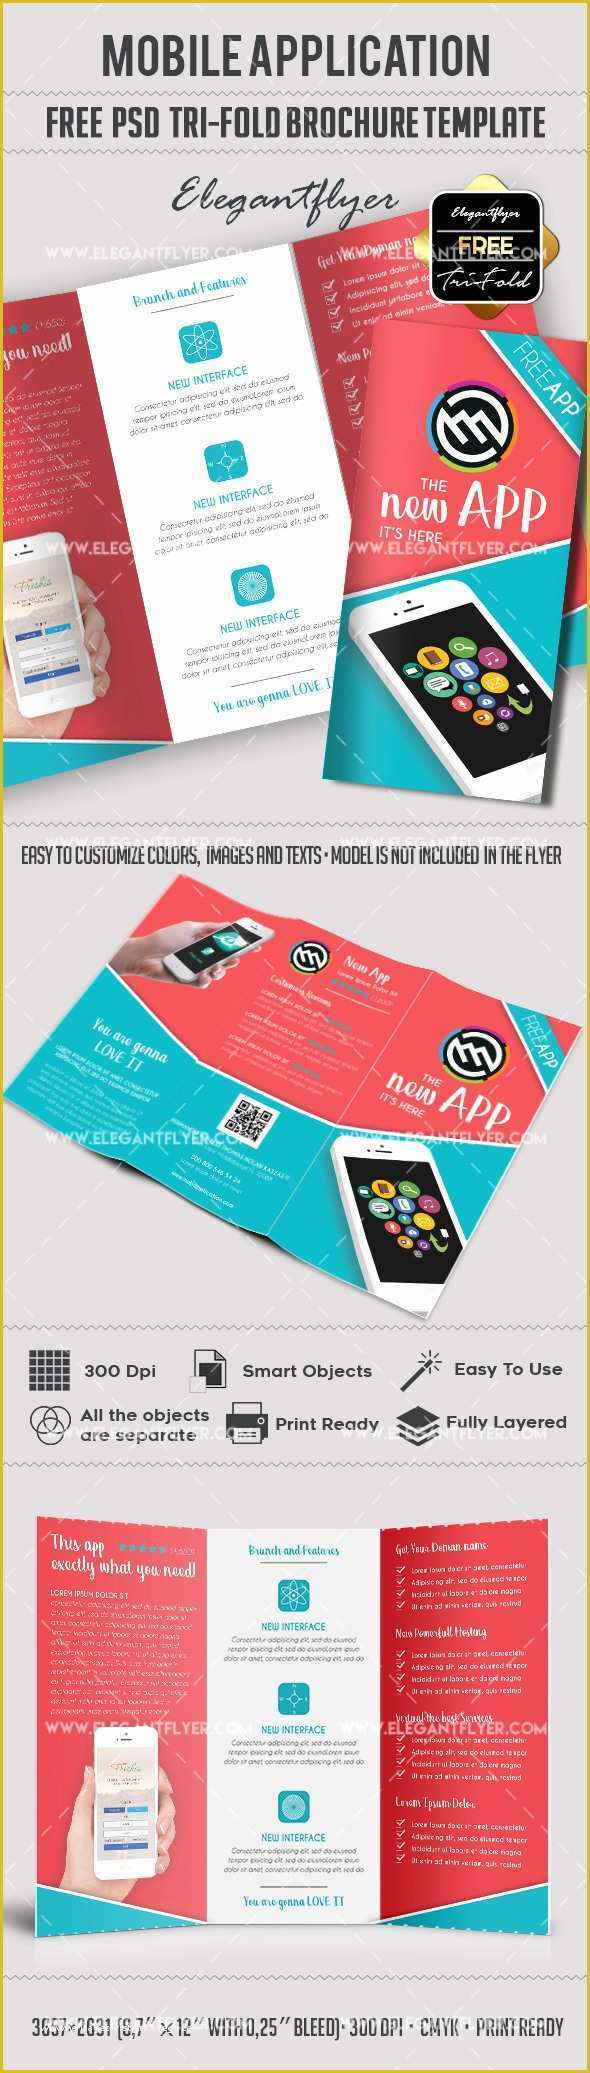 Free Flyer Brochure Templates Of Free Mobile Application Tri Fold Psd Brochure – by